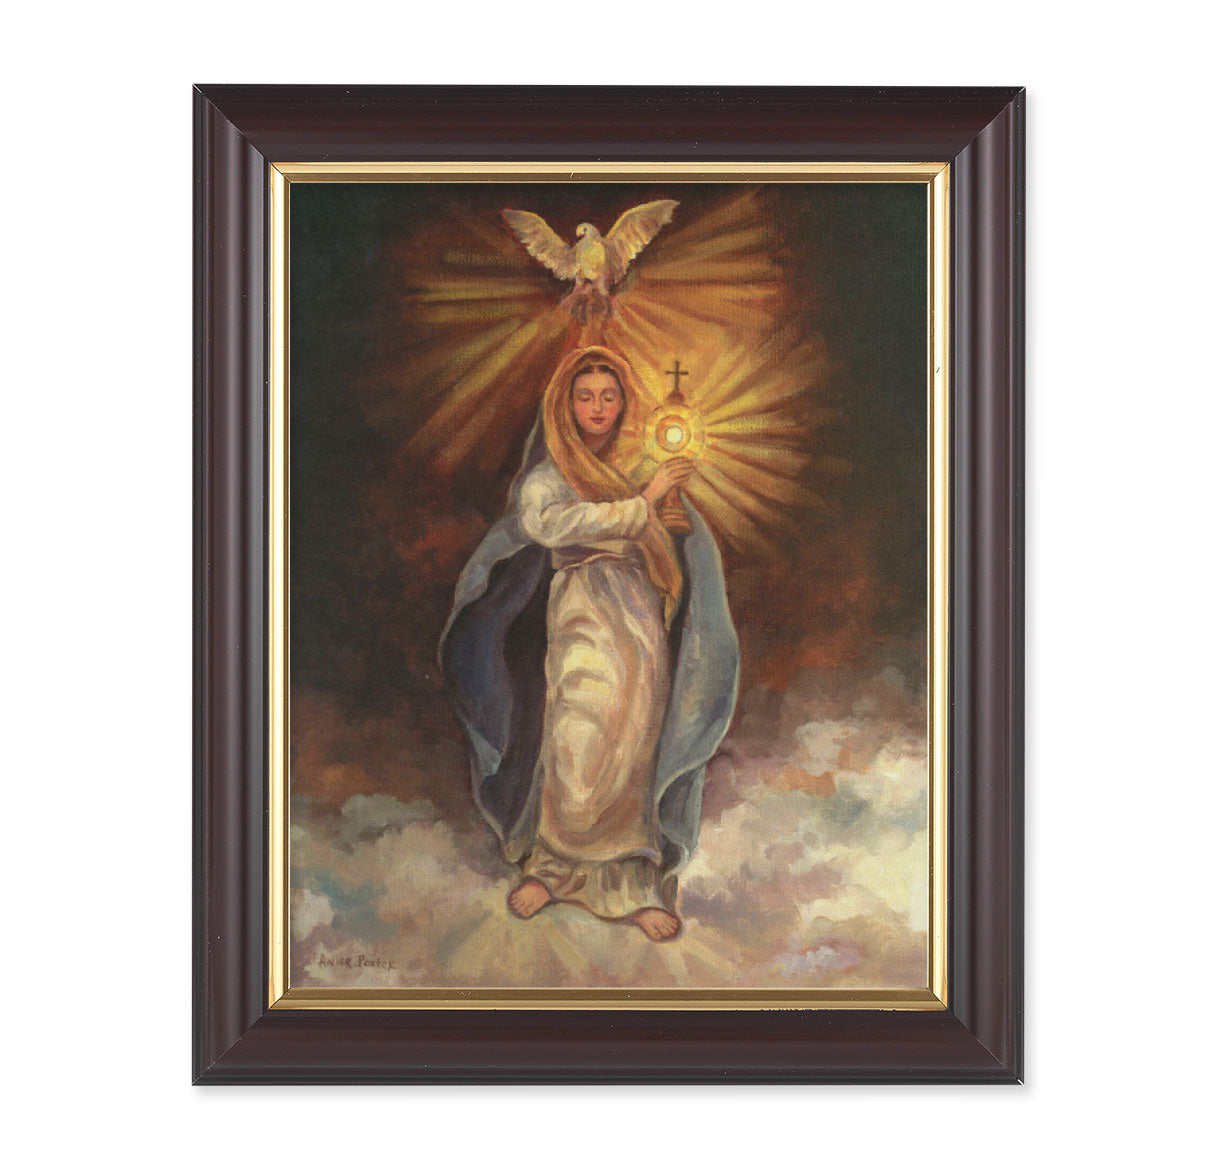 Mary with Monstrance Picture Framed Wall Art Decor Medium, Classic Fluted Dark Walnut Finished Frame with Gold-Leaf Lip